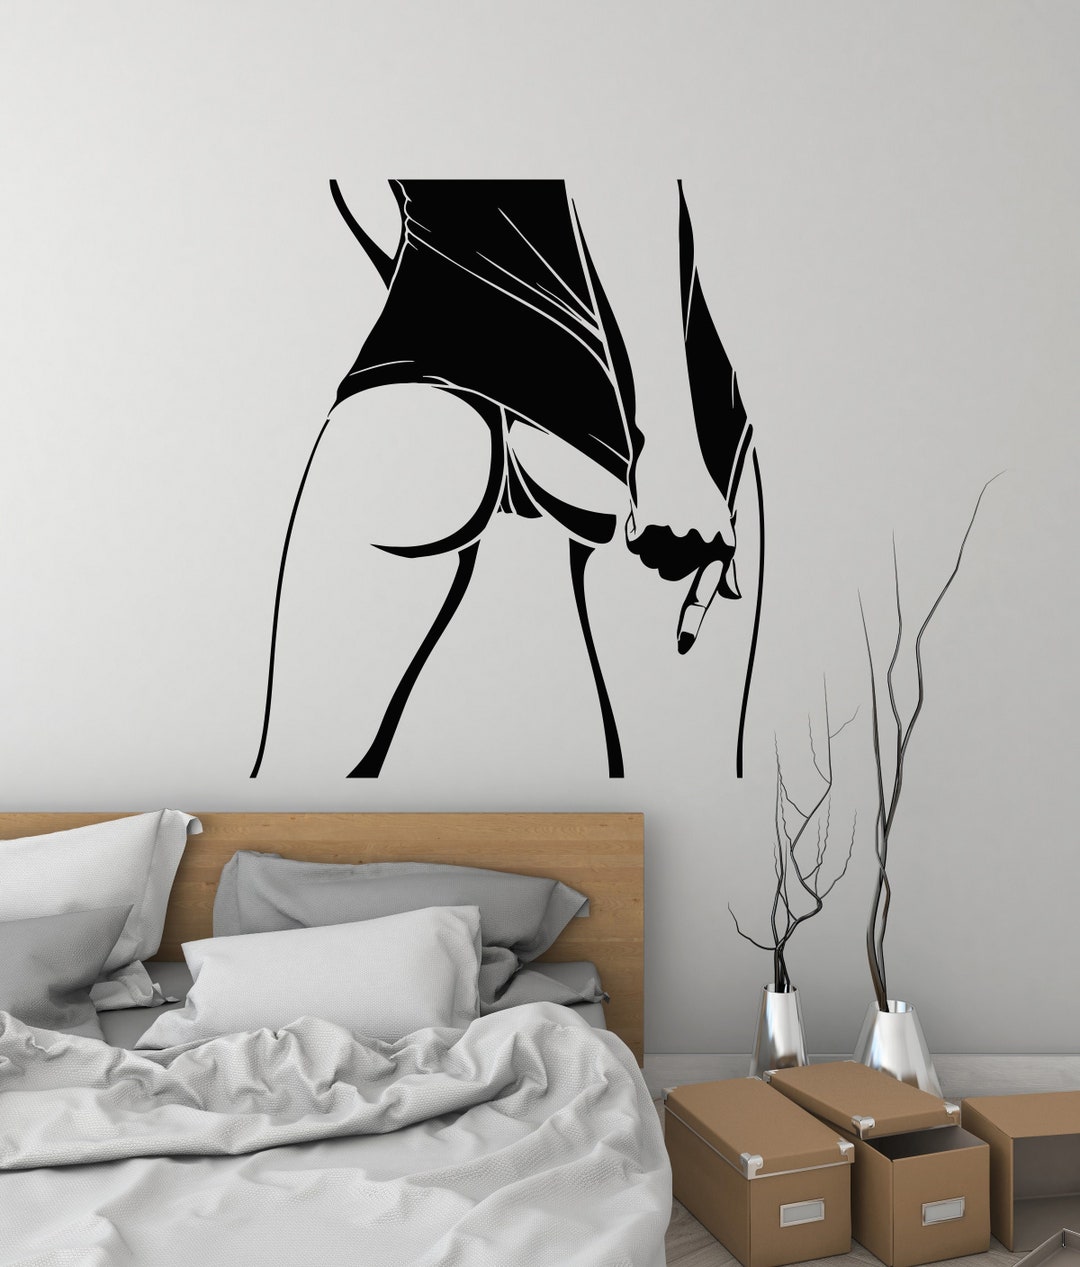 Vinyl Wall Decal Silhouette Hot Sexy Woman Adult Stickers Unique